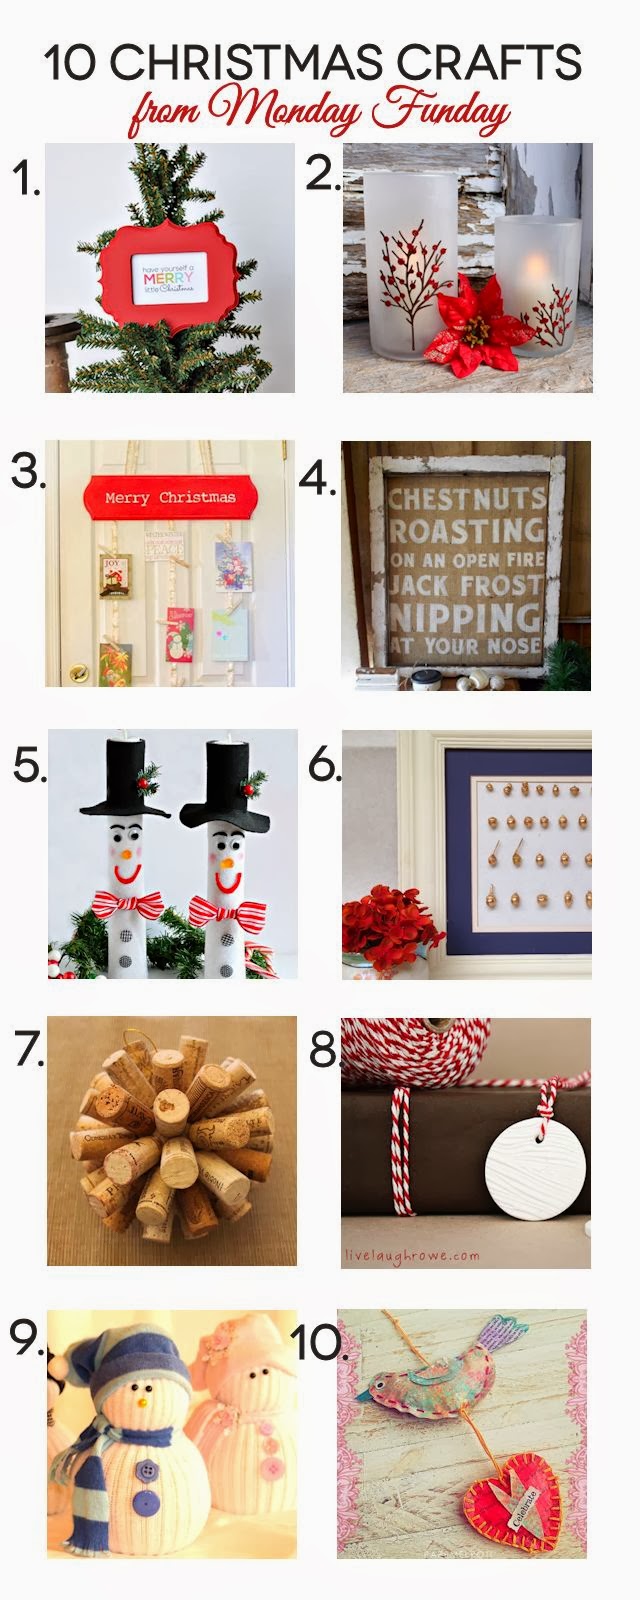 10 Amazing Christmas Crafts from the Monday Funday Link Party. Party starts each Sunday night at 7pm EST. All links are on 6 blogs! via www.uncommondesignsonline.com